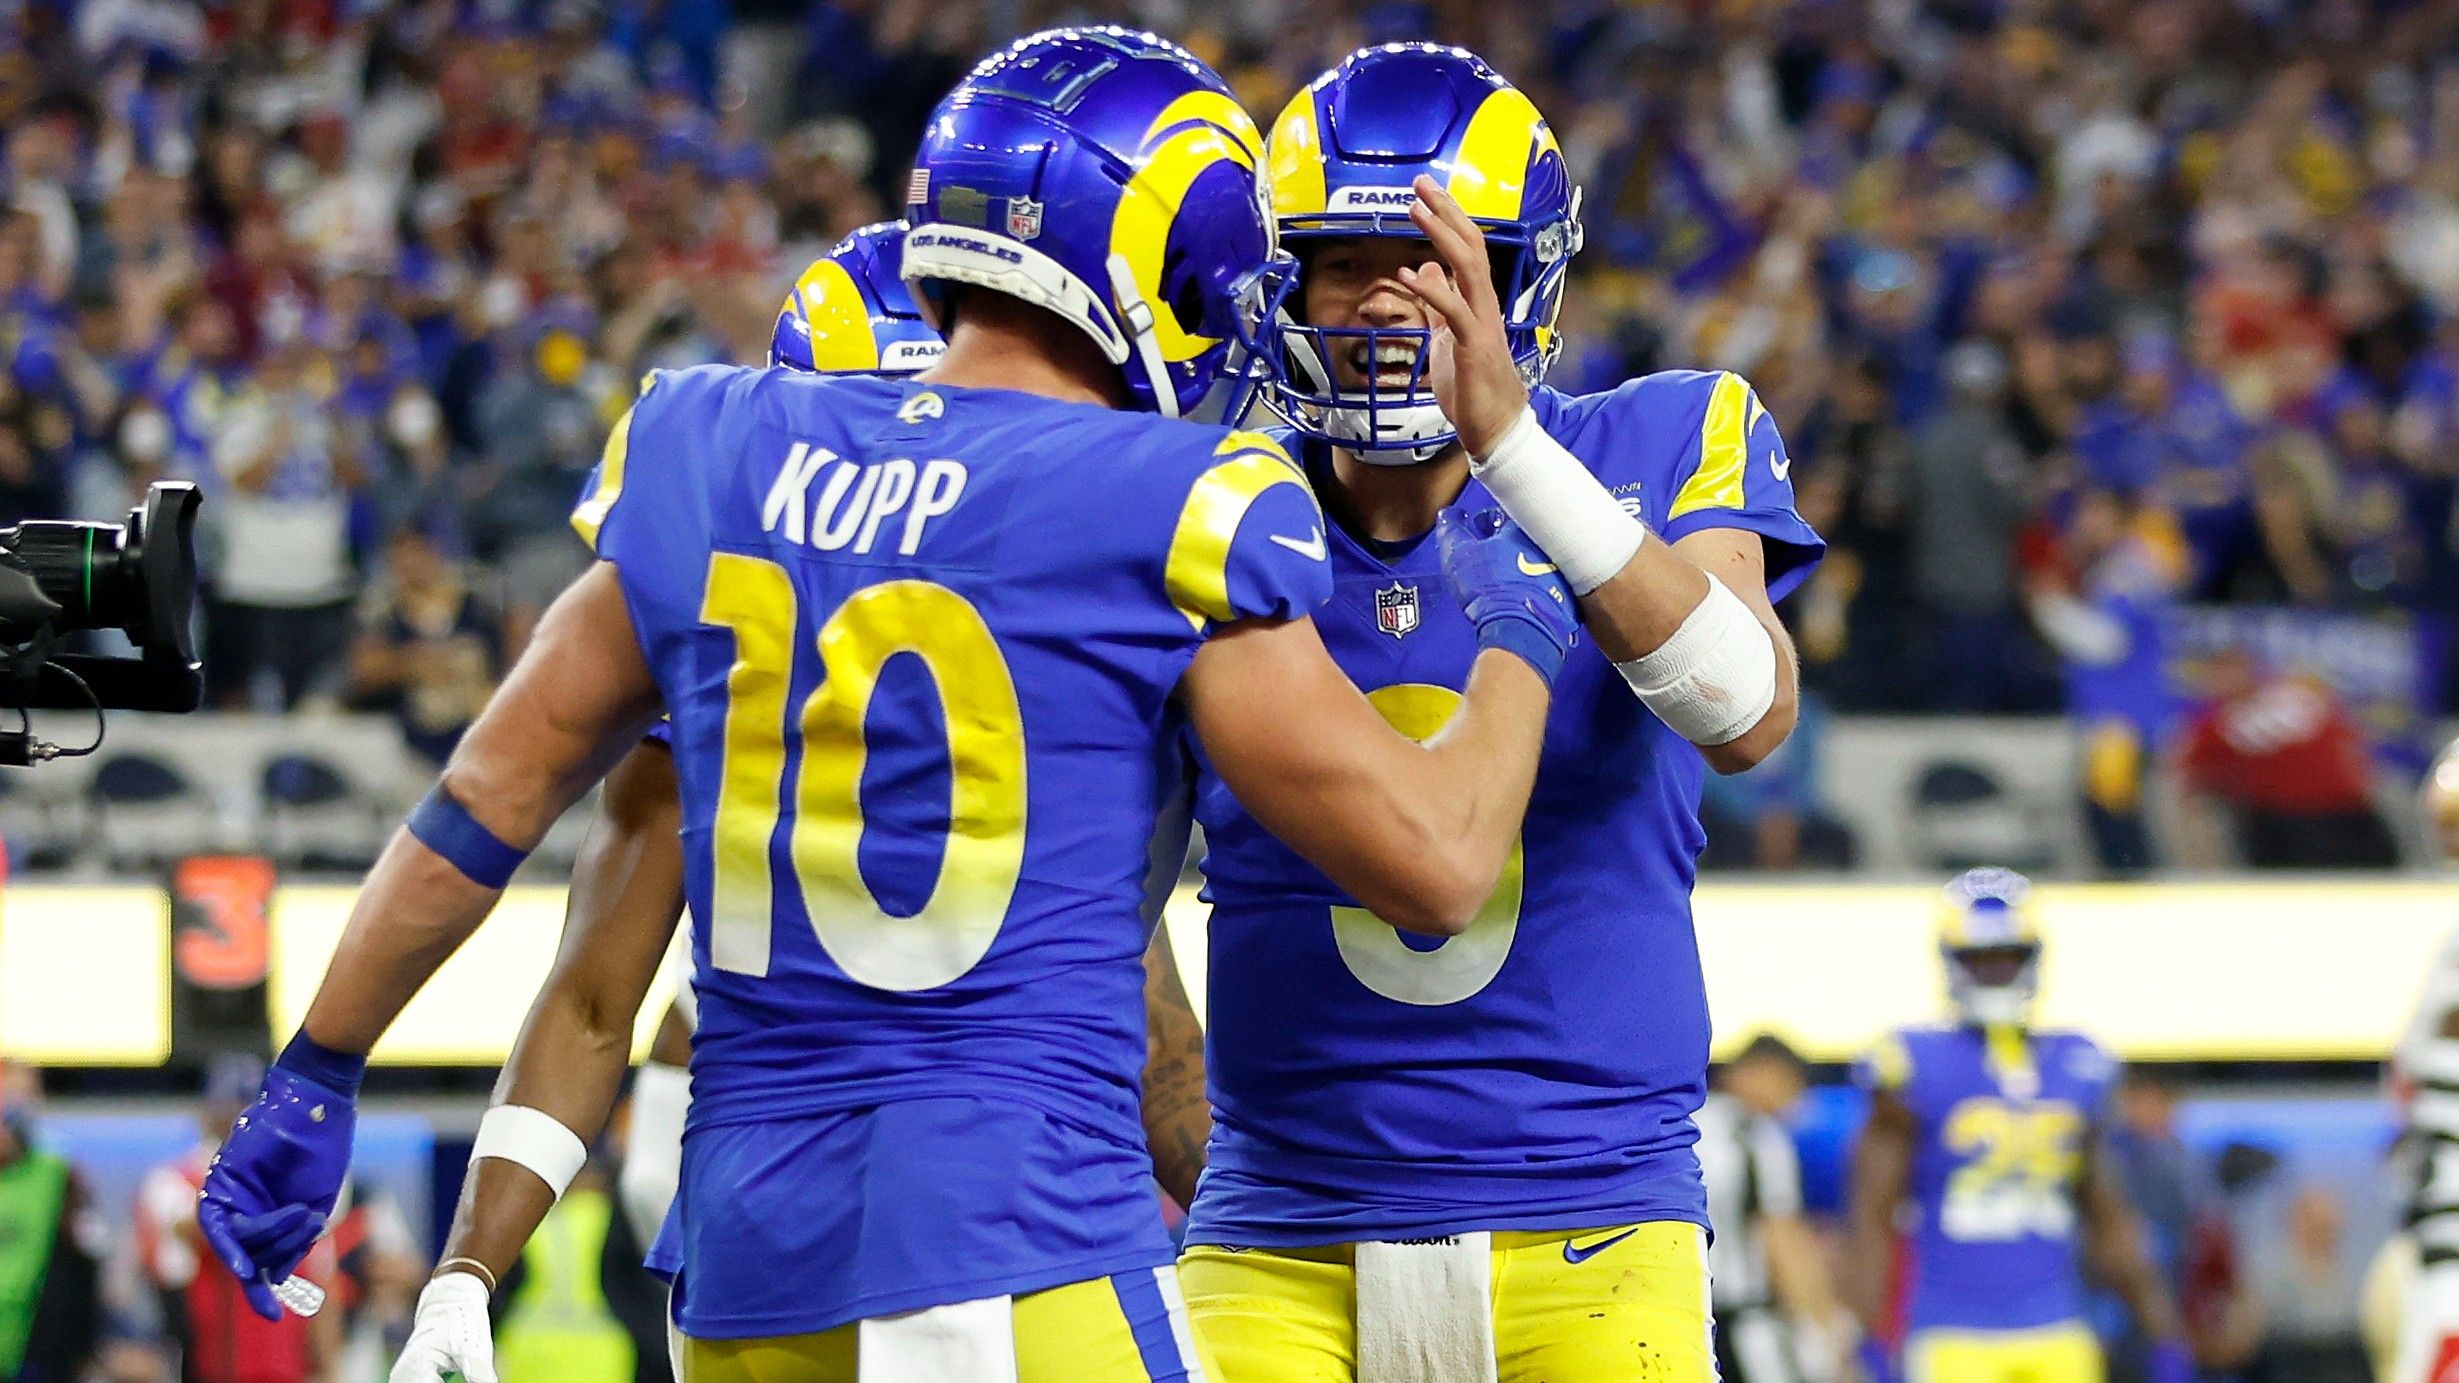 Los Angeles Rams advance to Super Bowl after win over San Francisco 49ers